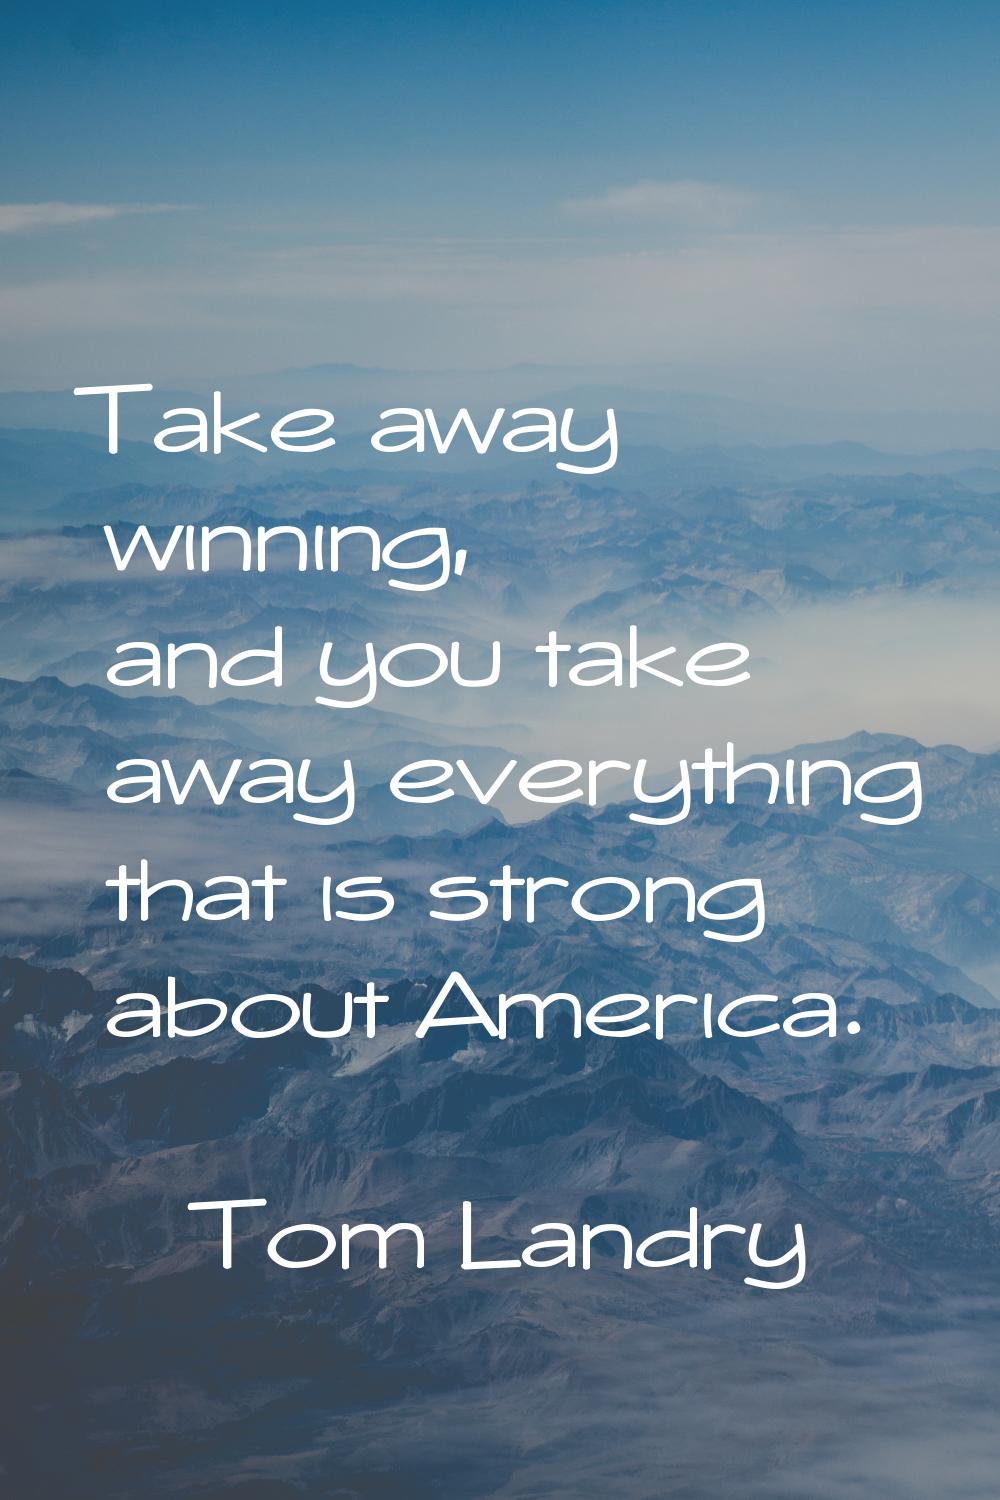 Take away winning, and you take away everything that is strong about America.